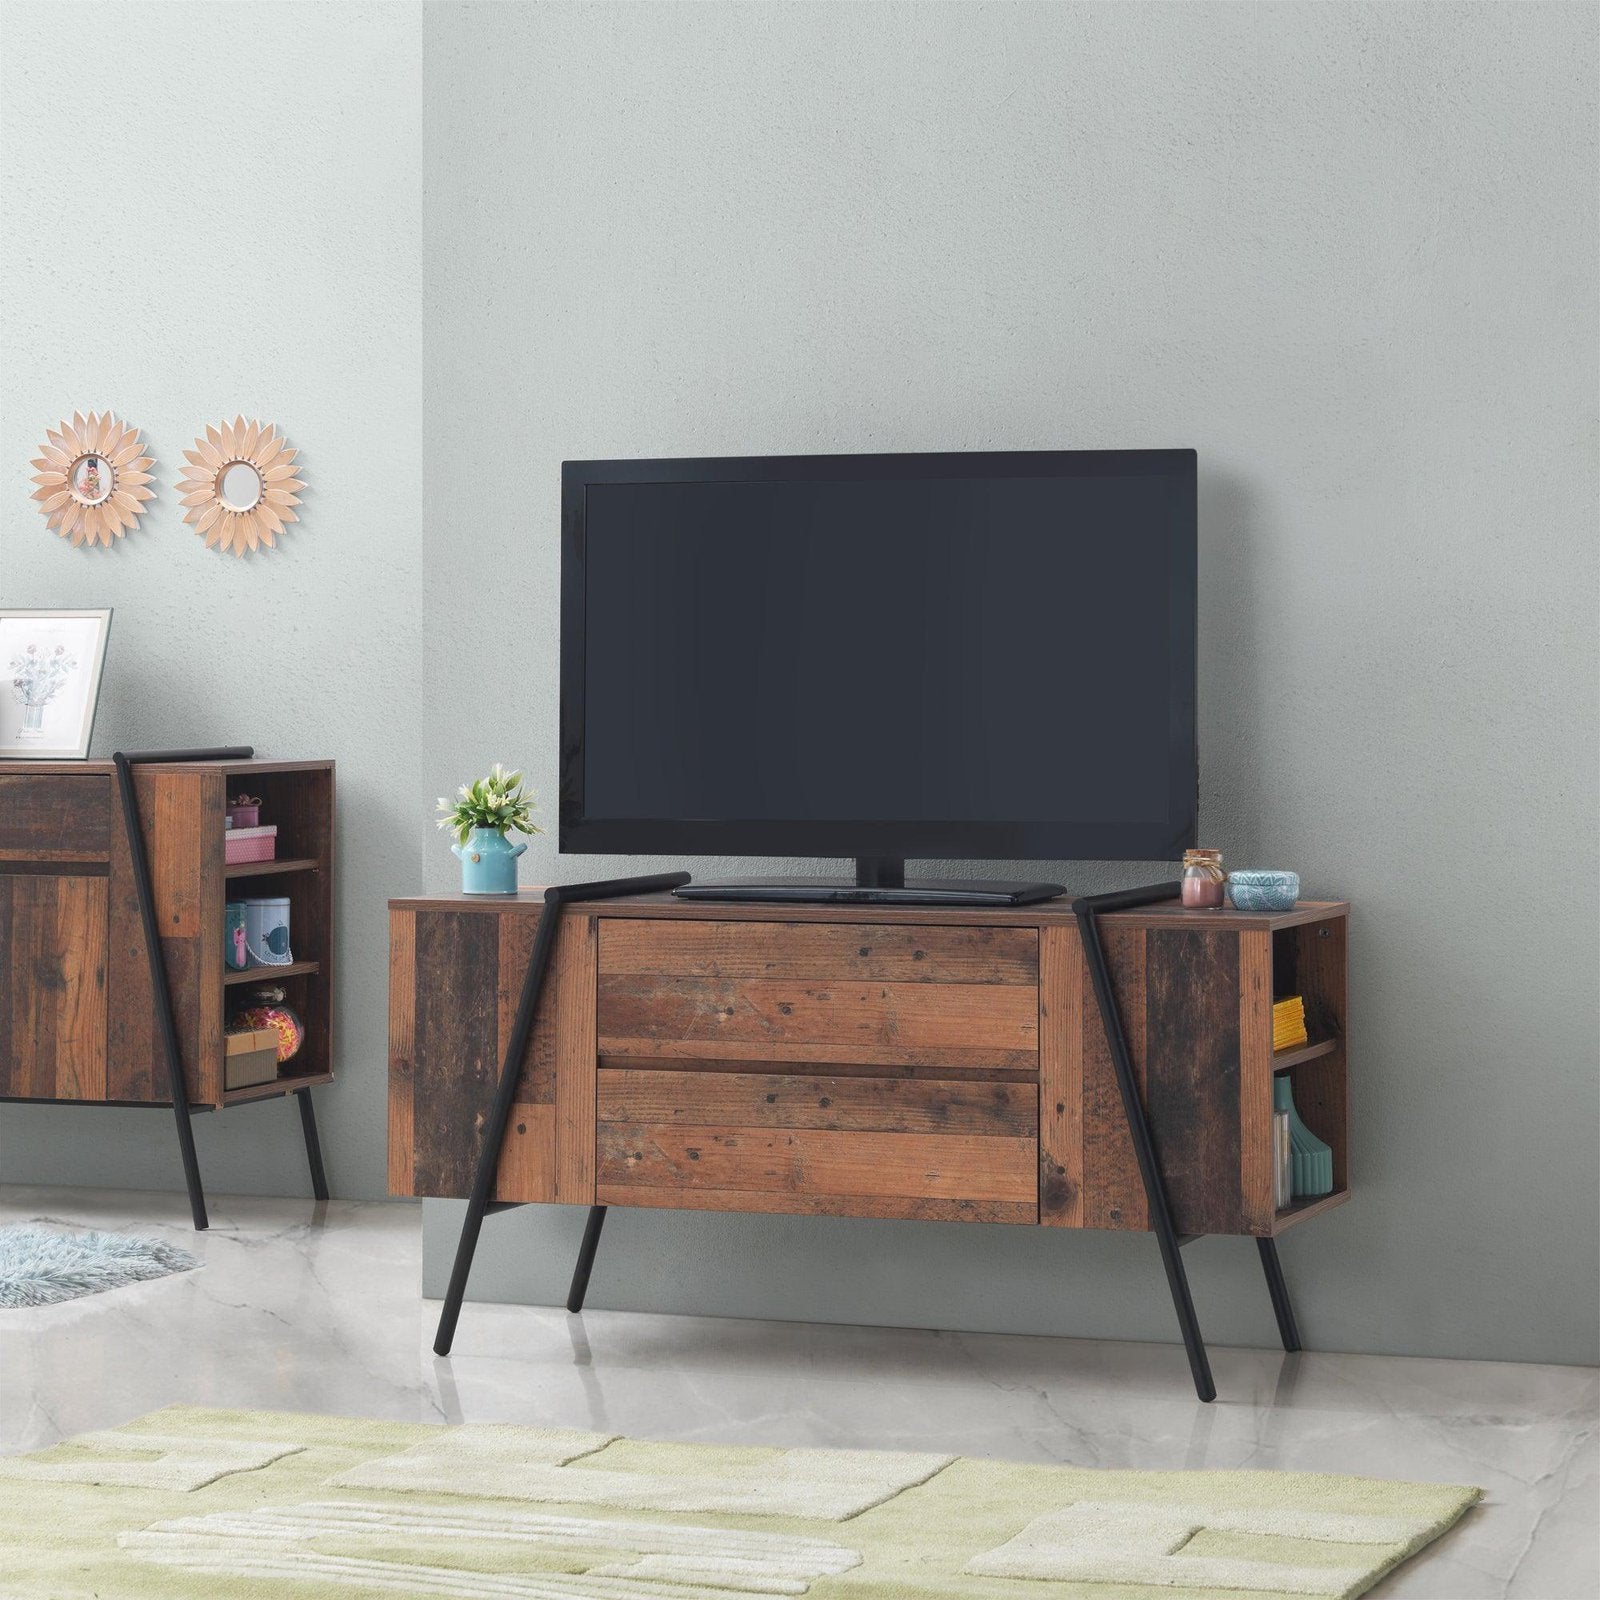 Abbey TV Unit Stand Cabinet Rustic Industrial Living Room Furniture - 2 Drawers & 4 Shelves